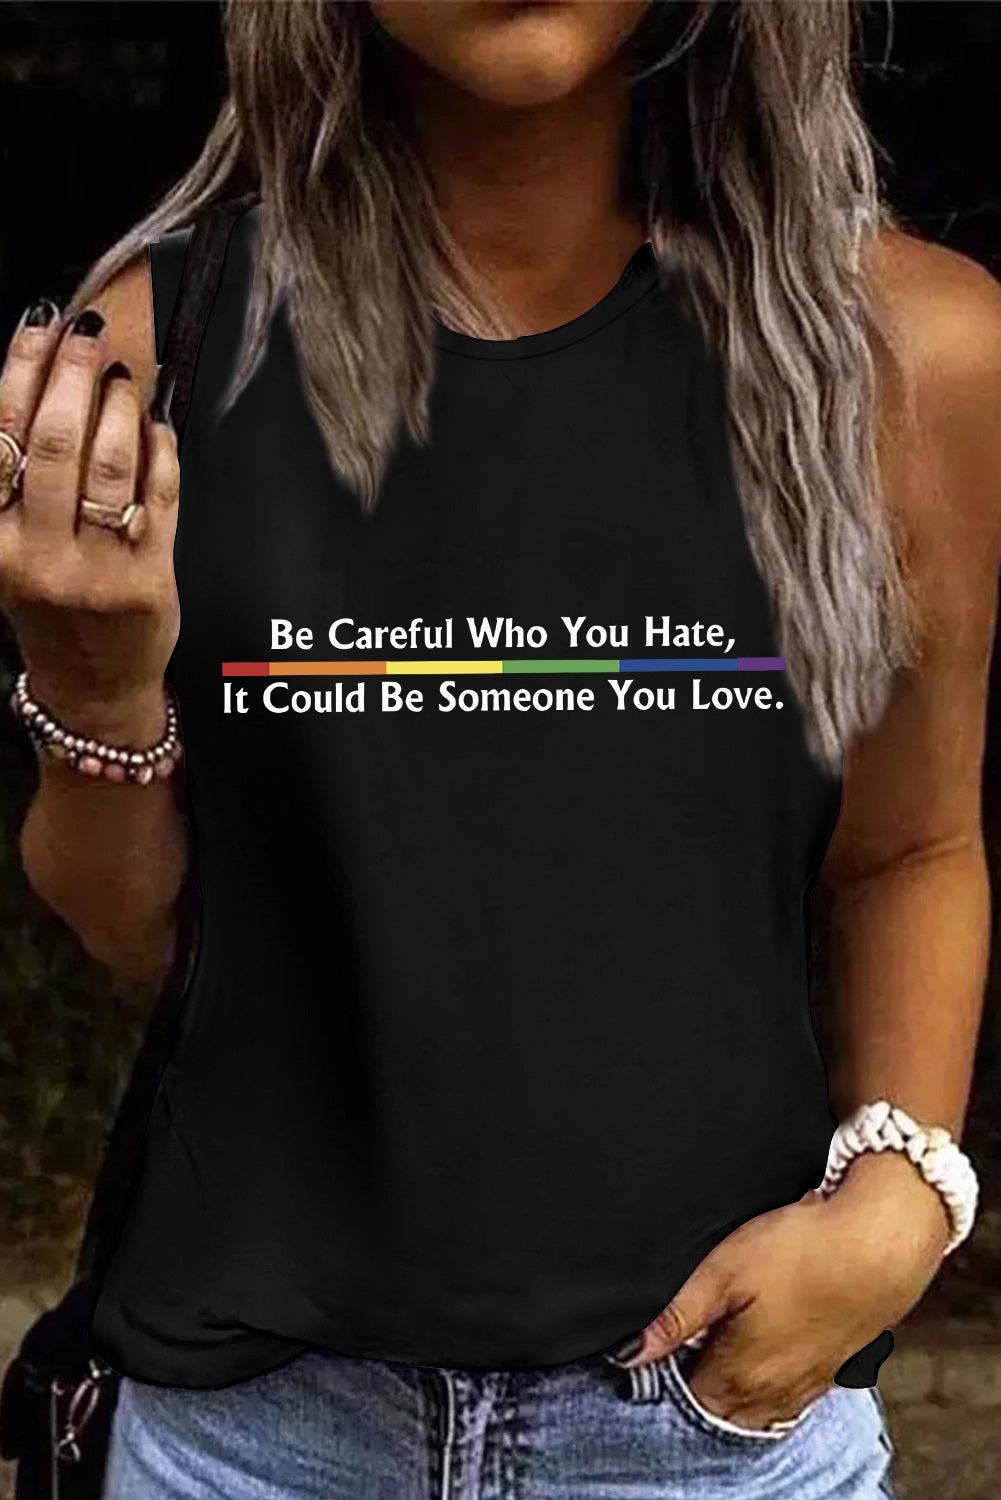 LC2569564-2-S, LC2569564-2-M, LC2569564-2-L, LC2569564-2-XL, LC2569564-2-2XL, Black Womens LGBT Sleeveless Top Be Careful Who You Hate It Could Be Someone You Love Tank Tops